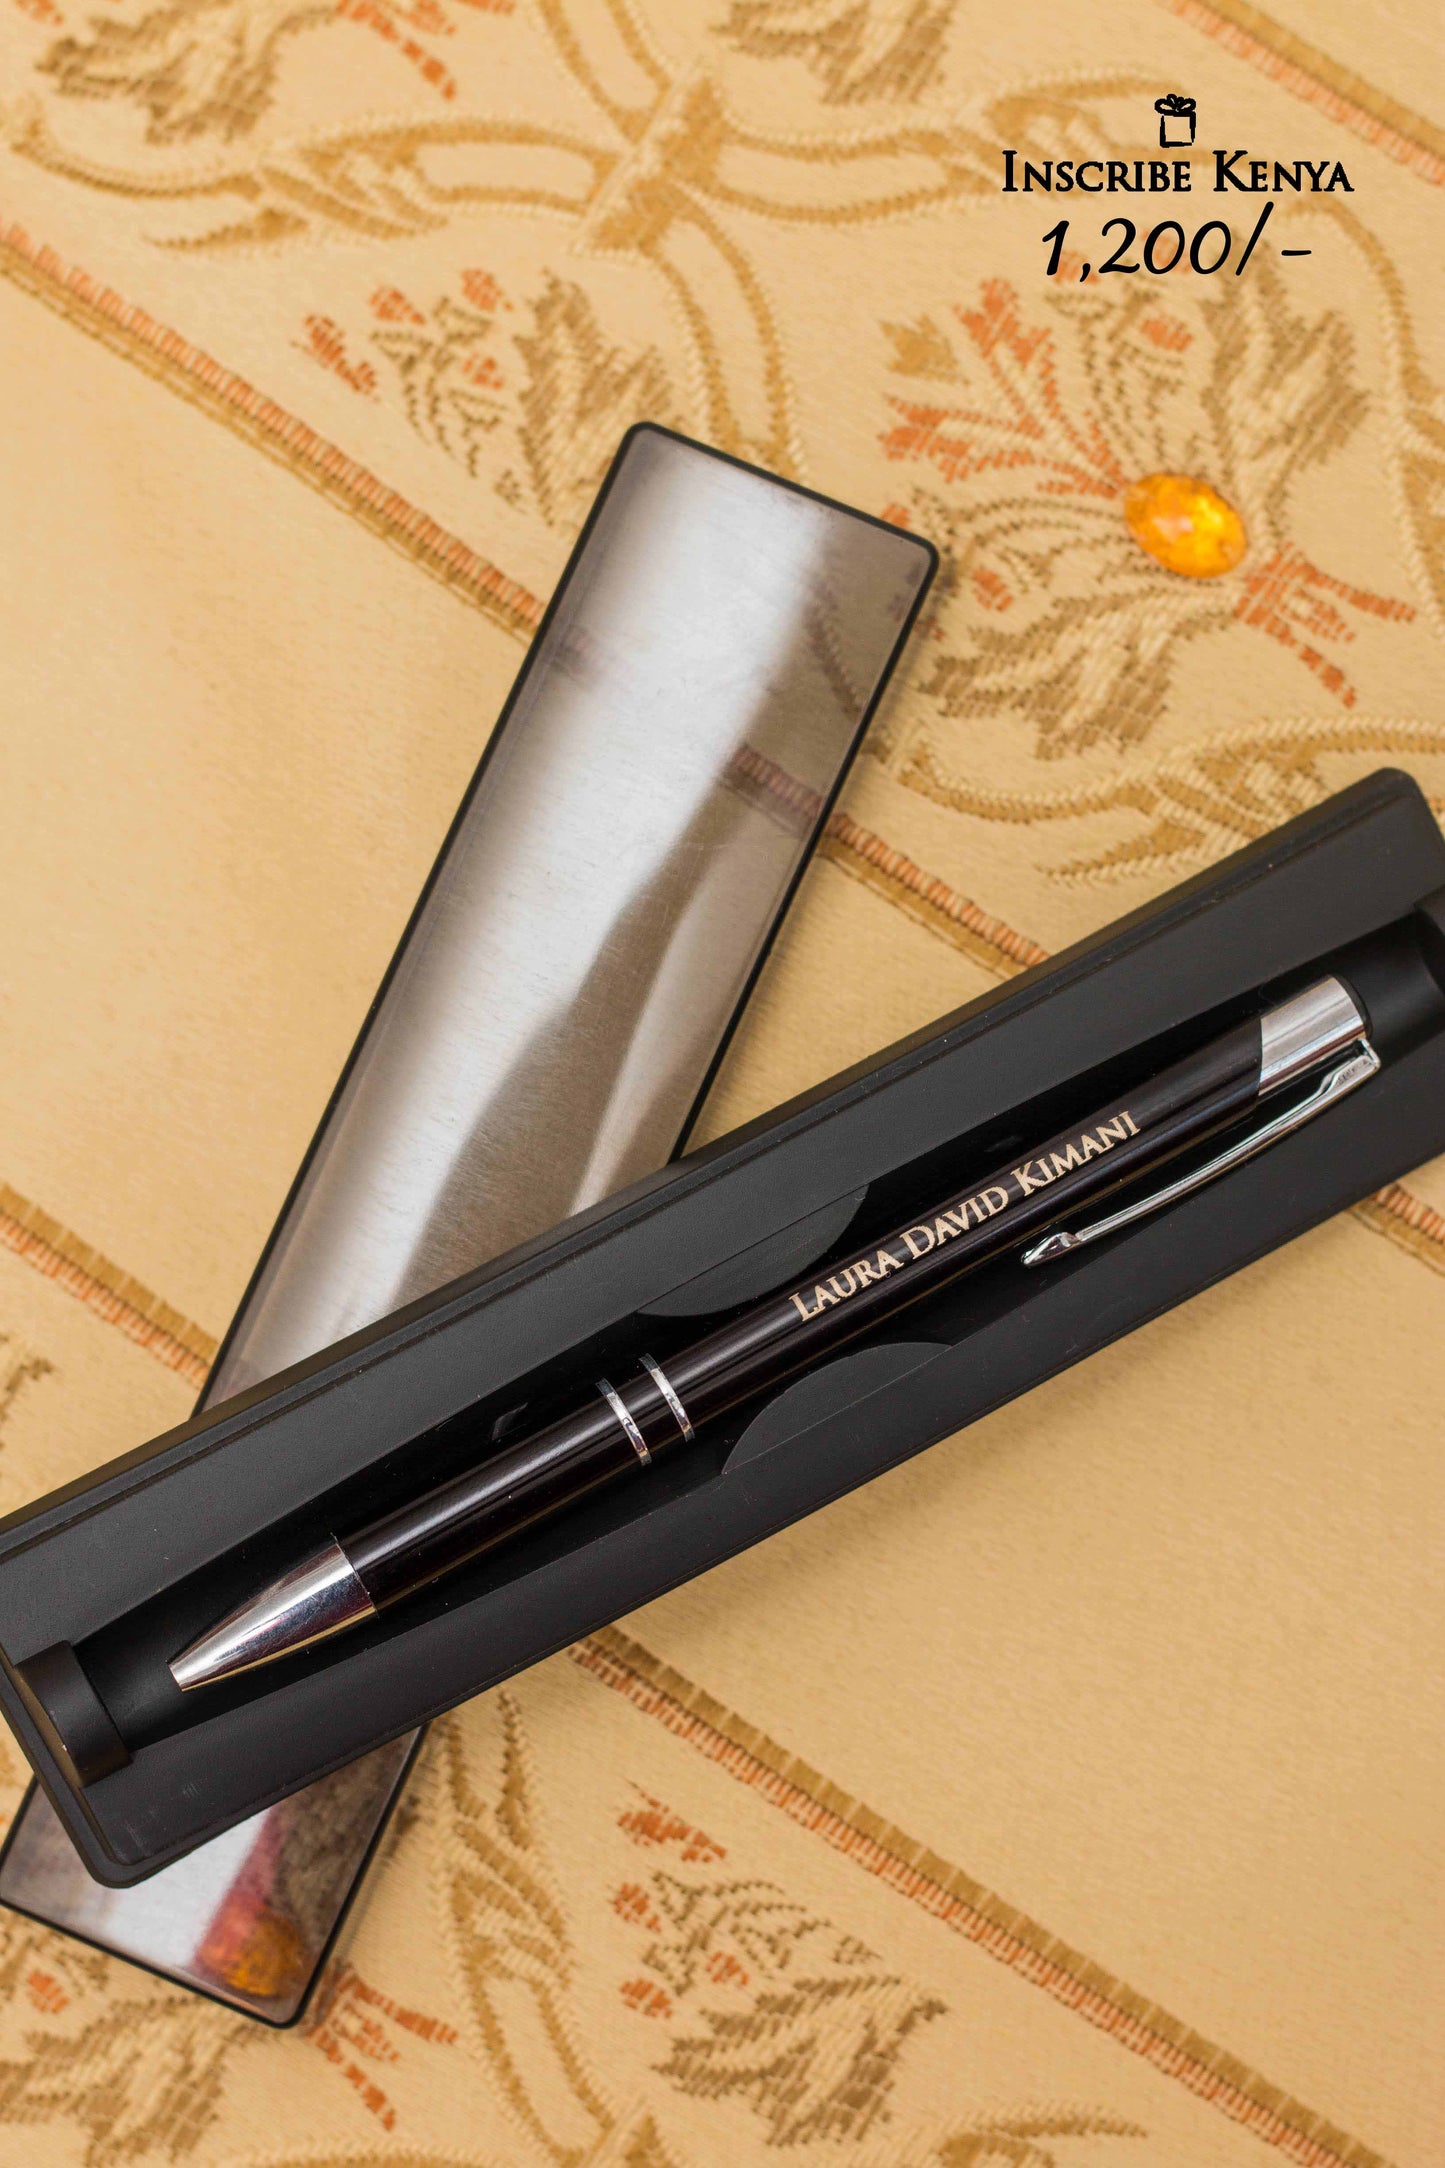 Inscribed Metallic Black ball pen with casing